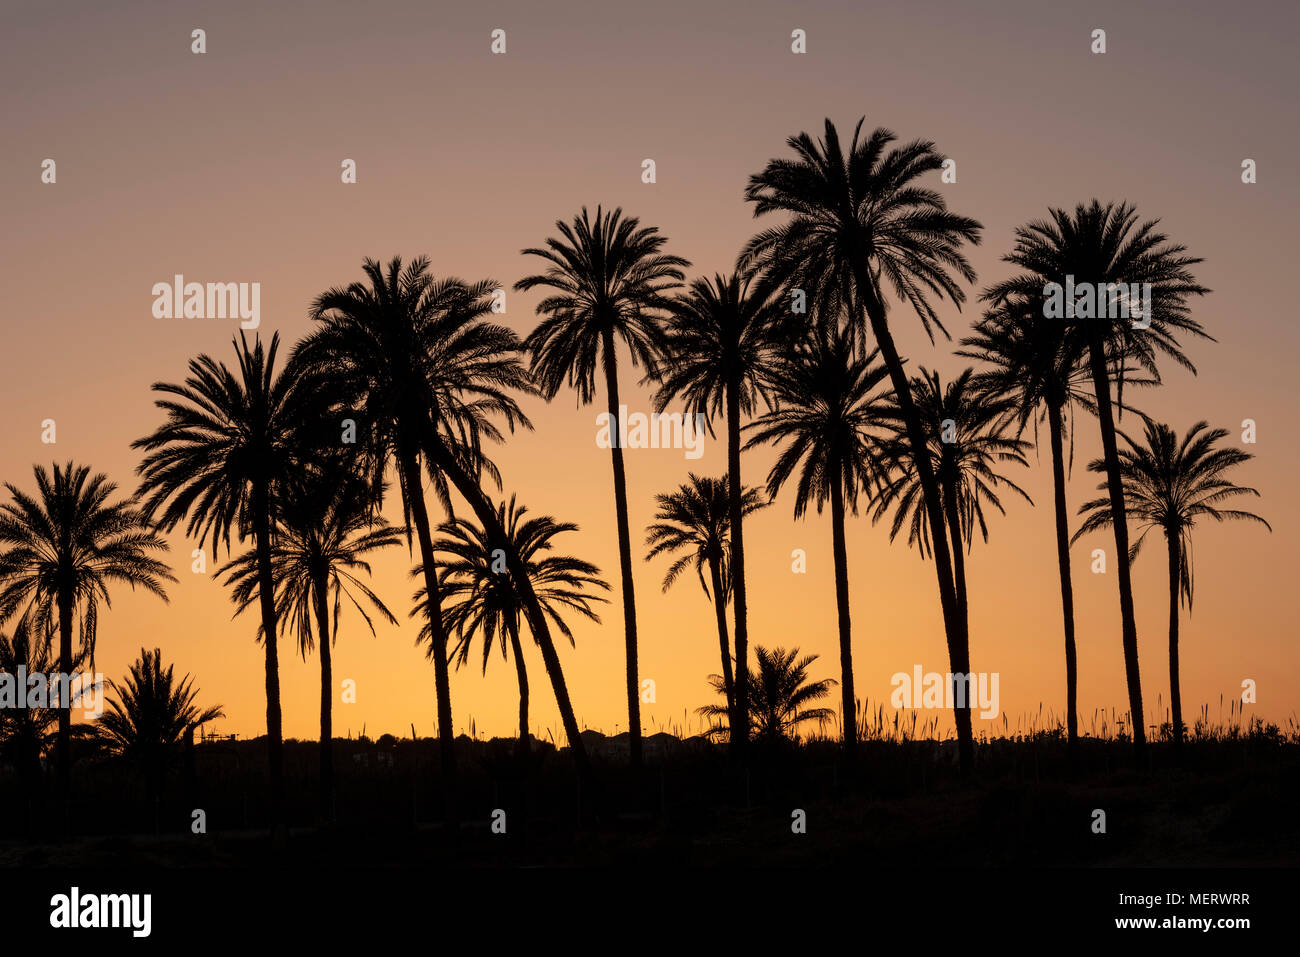 Sunset with palm tree grove silhouetted, blue sky with golden sun,Cala ferris, Torrevieja,Costa Blanca, Spain Stock Photo